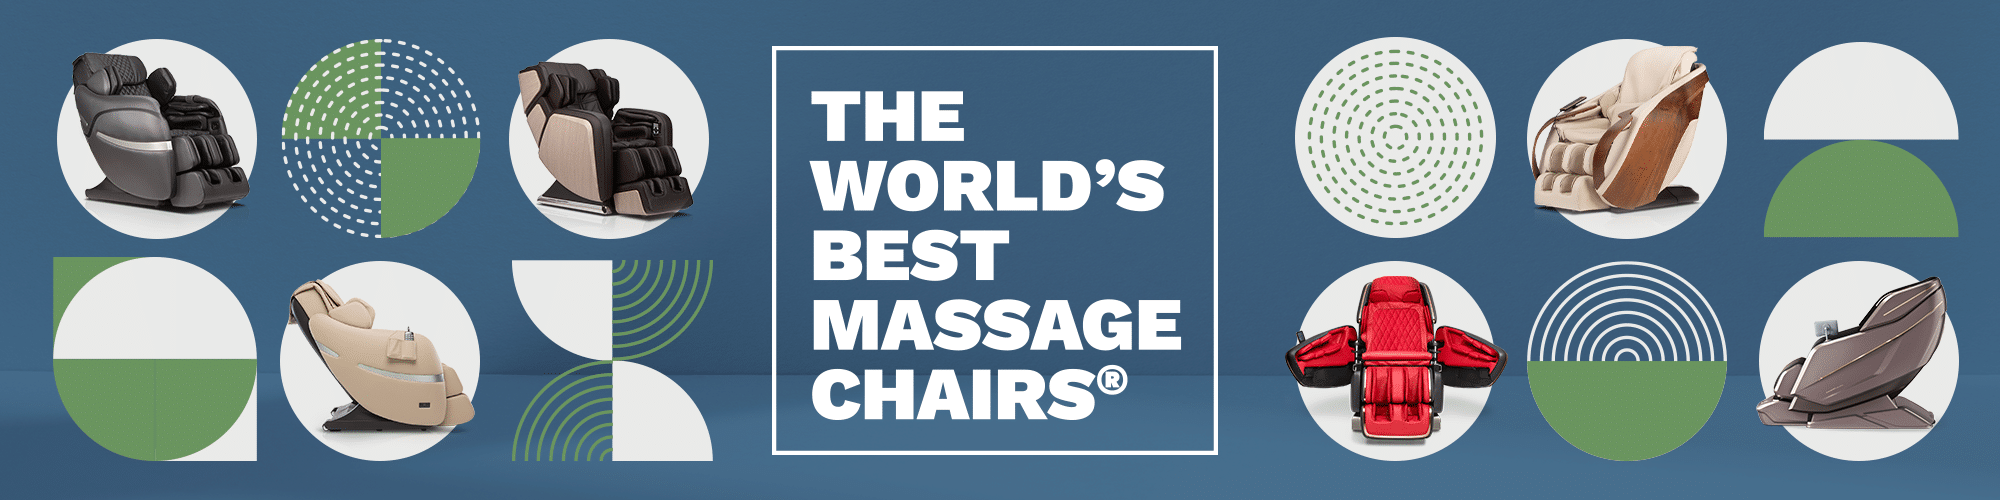 the worlds best massage chairs at furniture for life